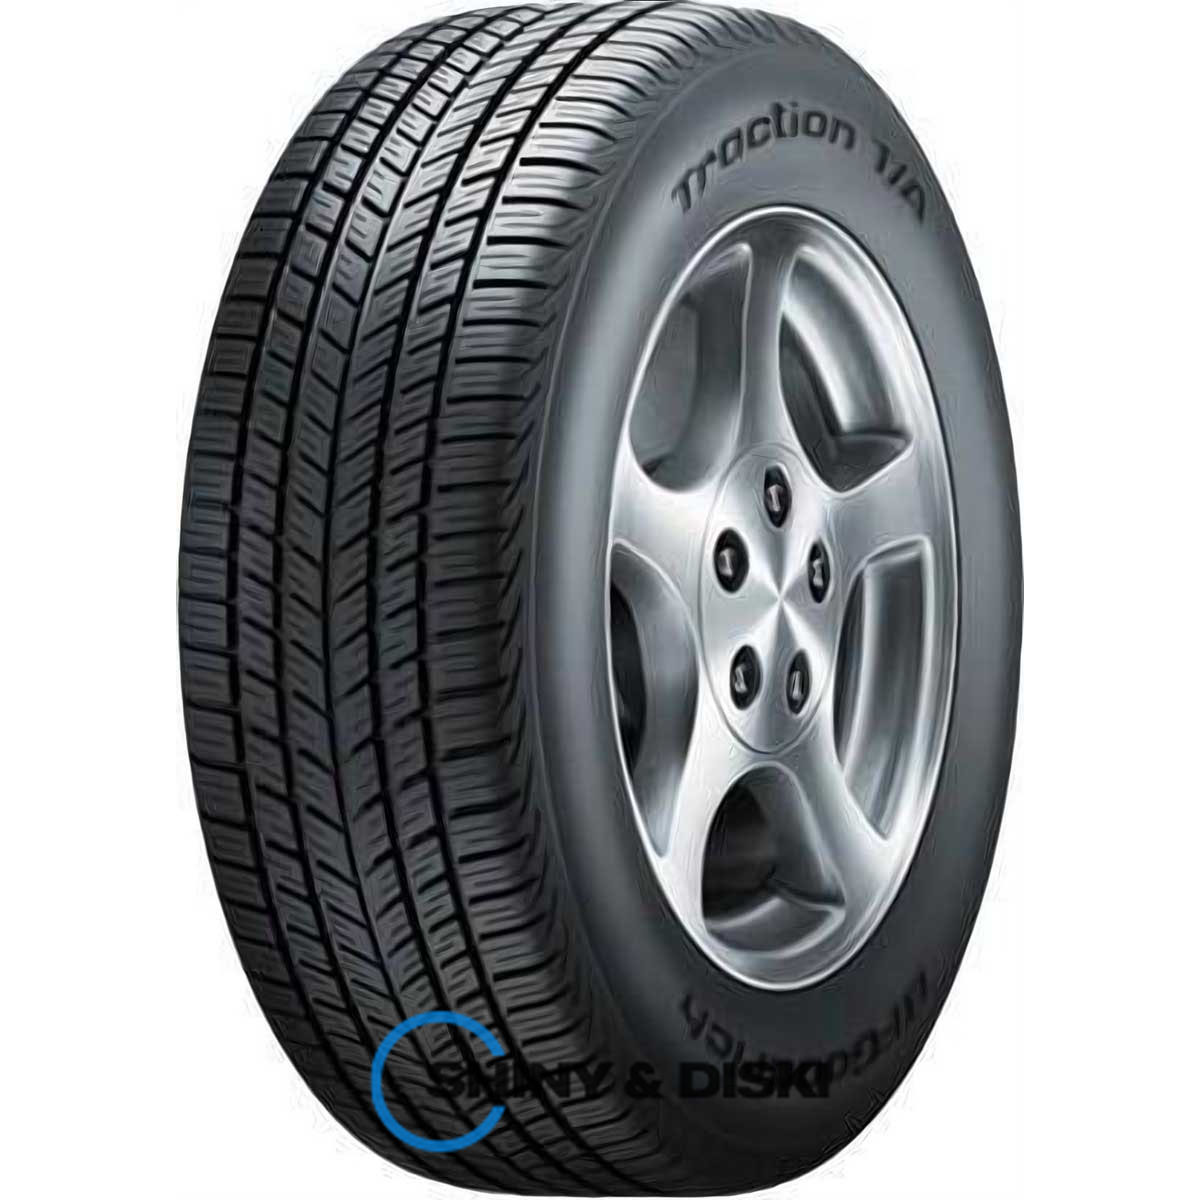 bfgoodrich traction t/a